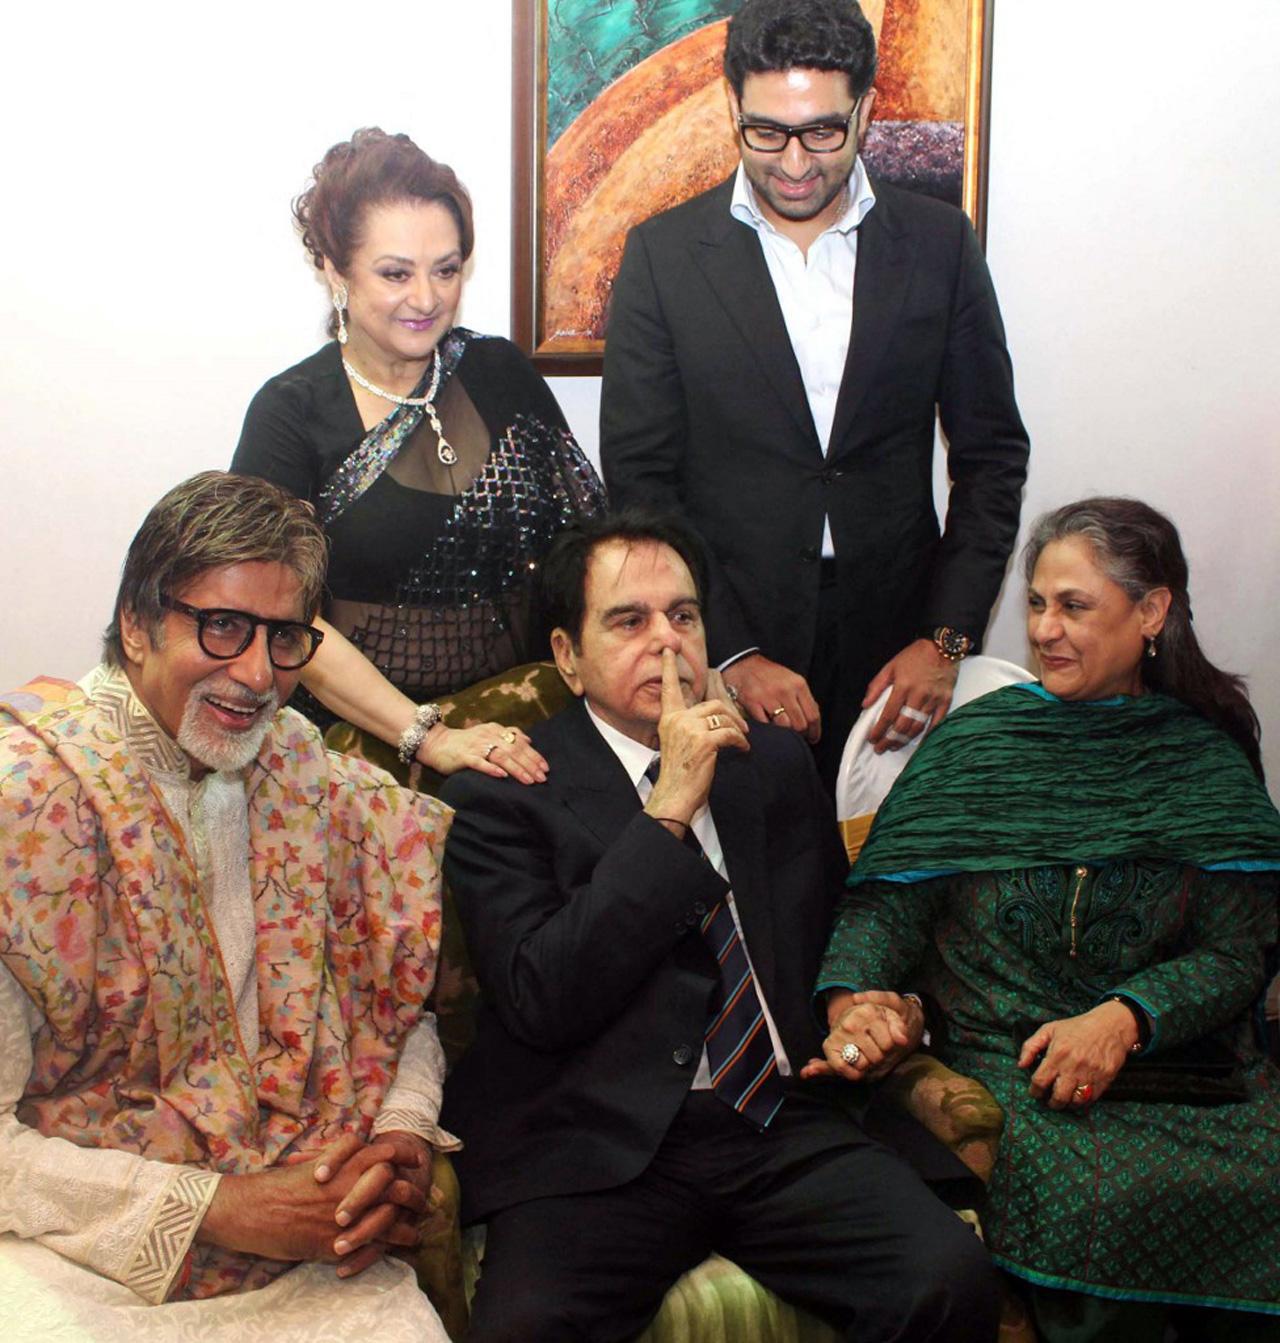 A candid picture of the Bachchans - Amitabh Bachchan, Jaya Bachchan and Abhishek Bachchan, when they attended Dilip Kumar's 89th birthday celebrations